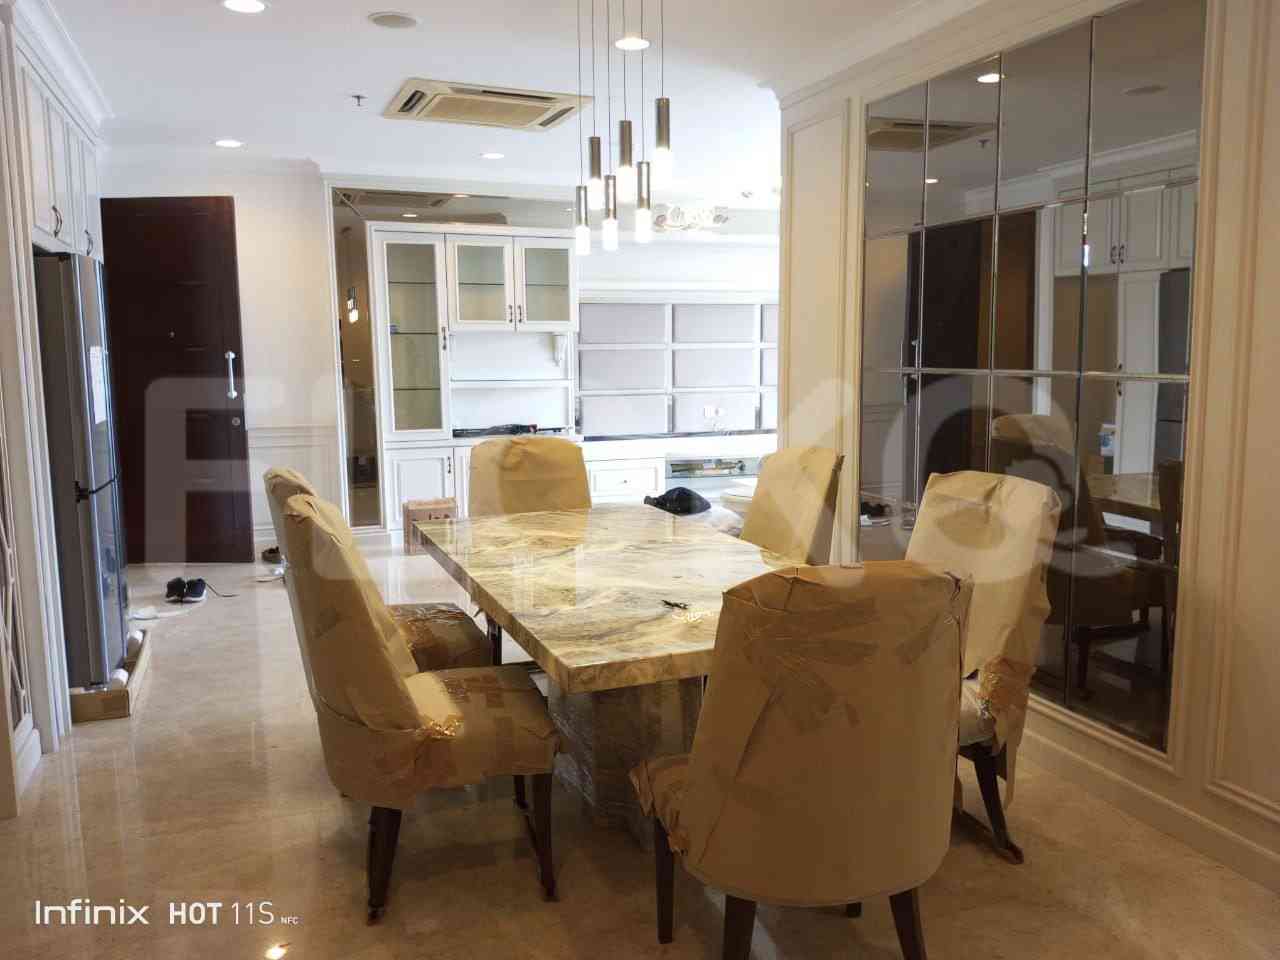 3 Bedroom on 17th Floor for Rent in The Grove Apartment - fkuf00 1